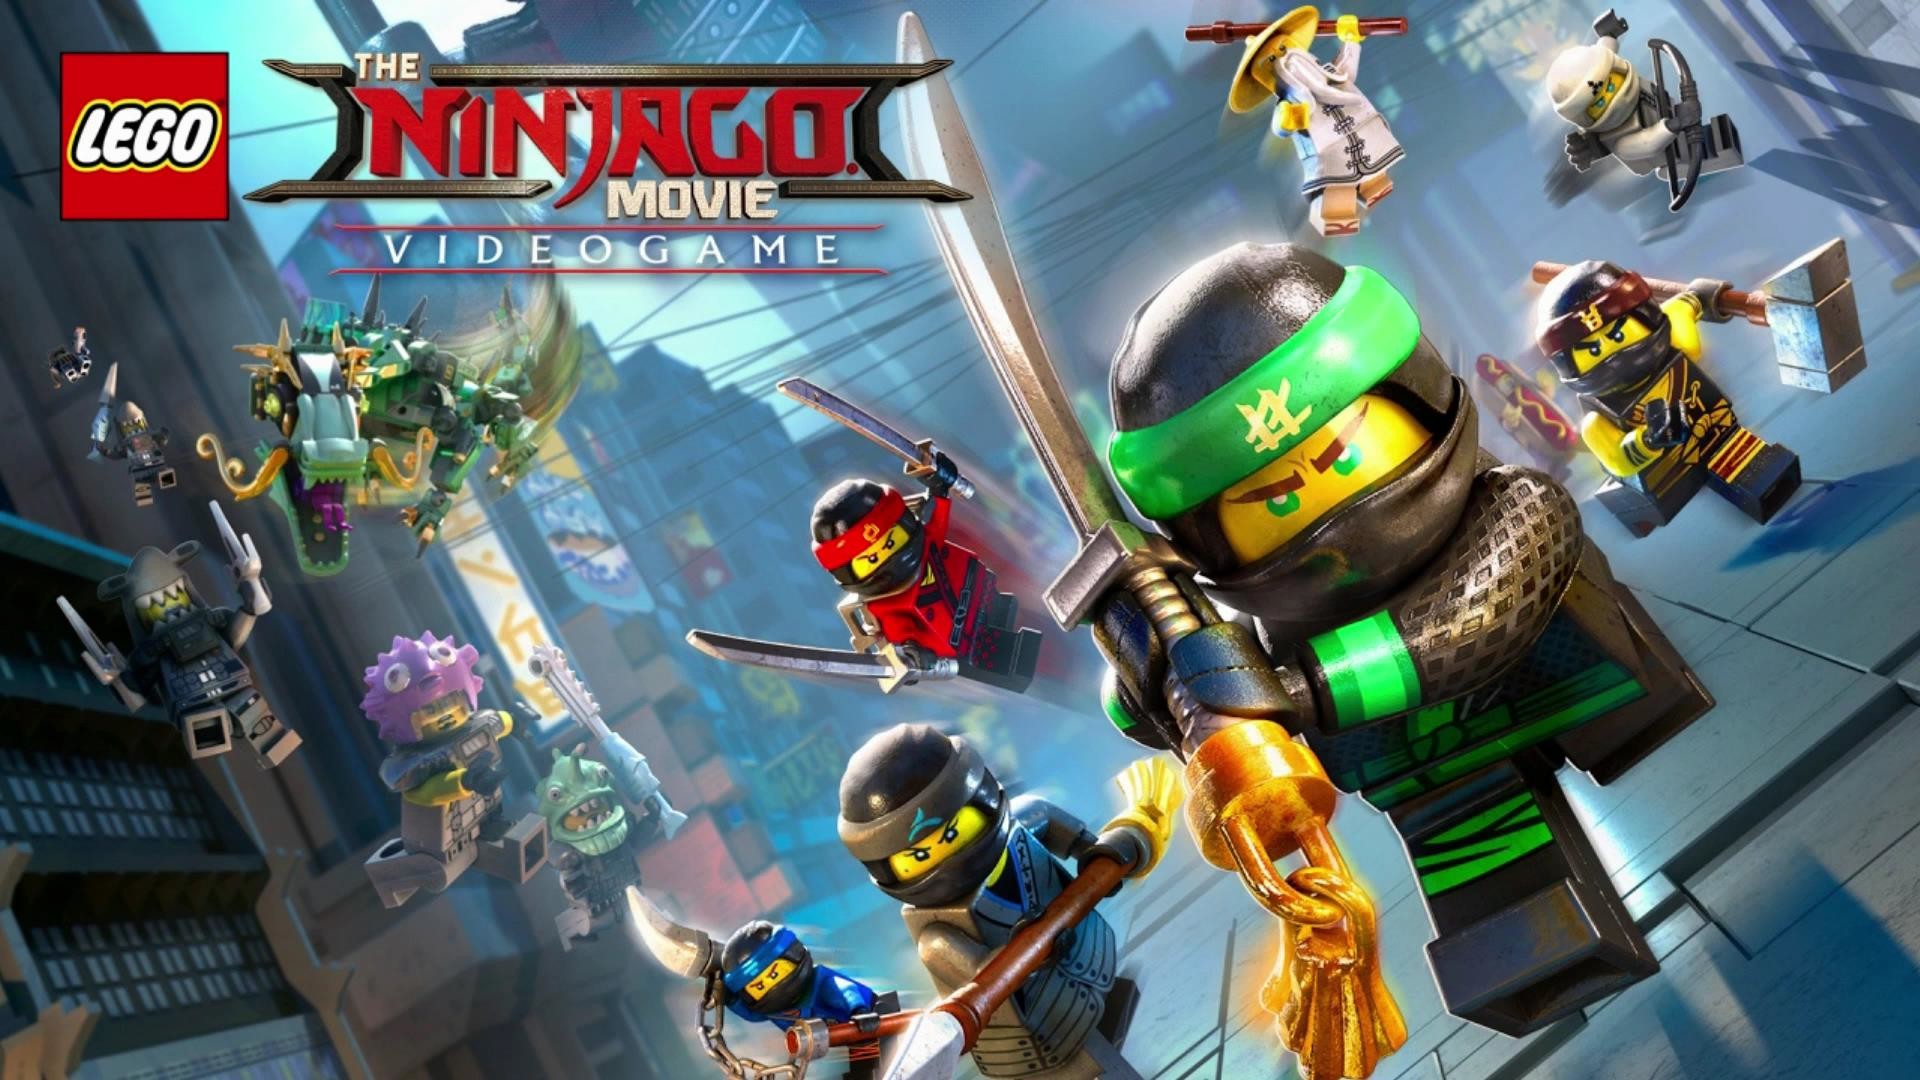 1920x1080 The LEGO Ninjago Movie Video Game is now available on Switch. Take a look  at the official launch trailer from Warner Bros. below.